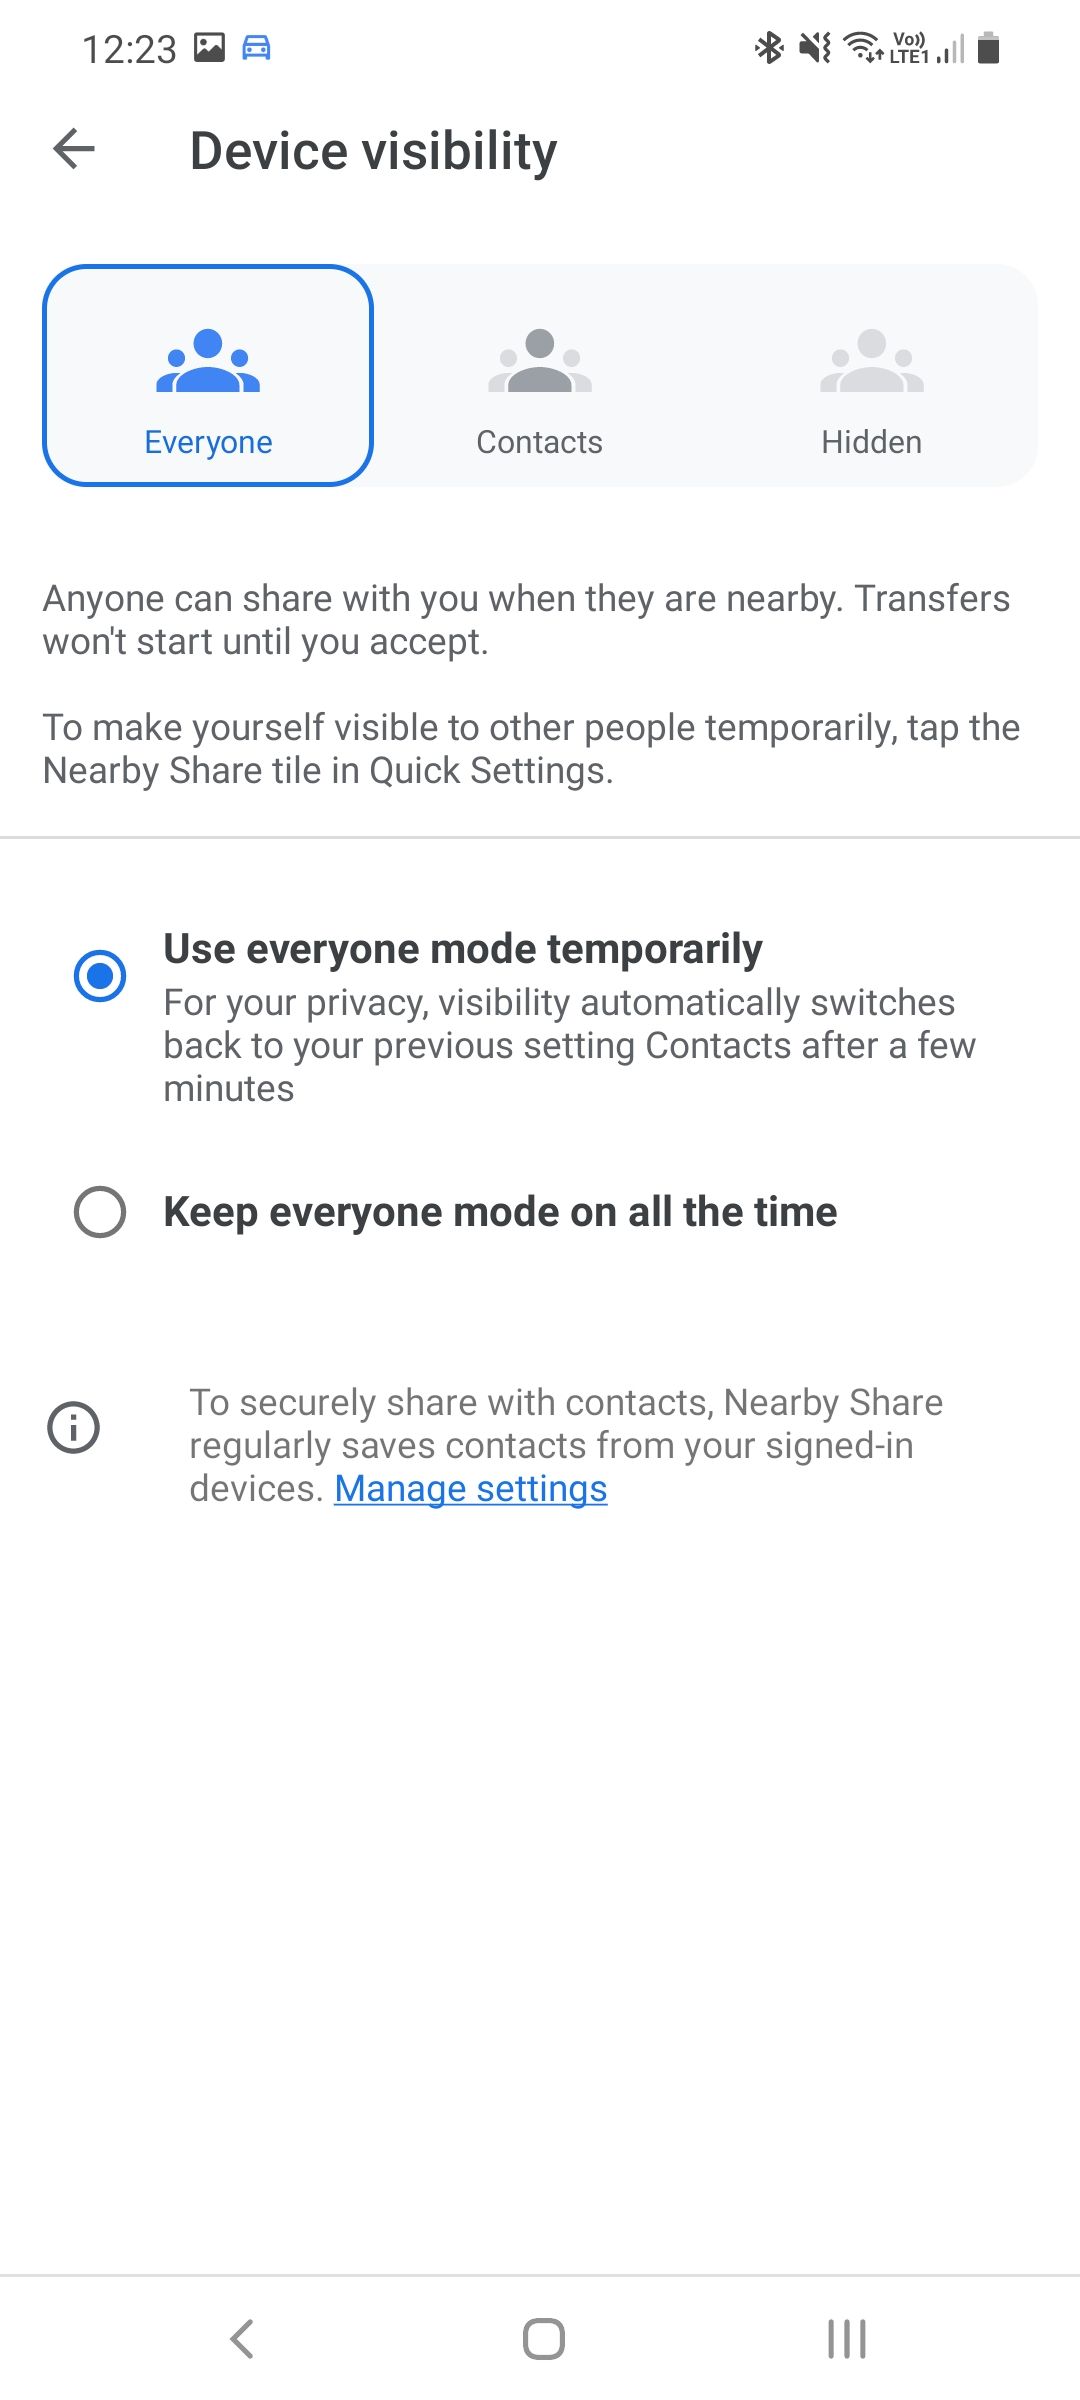 Nearby Share Device Visibility Settings